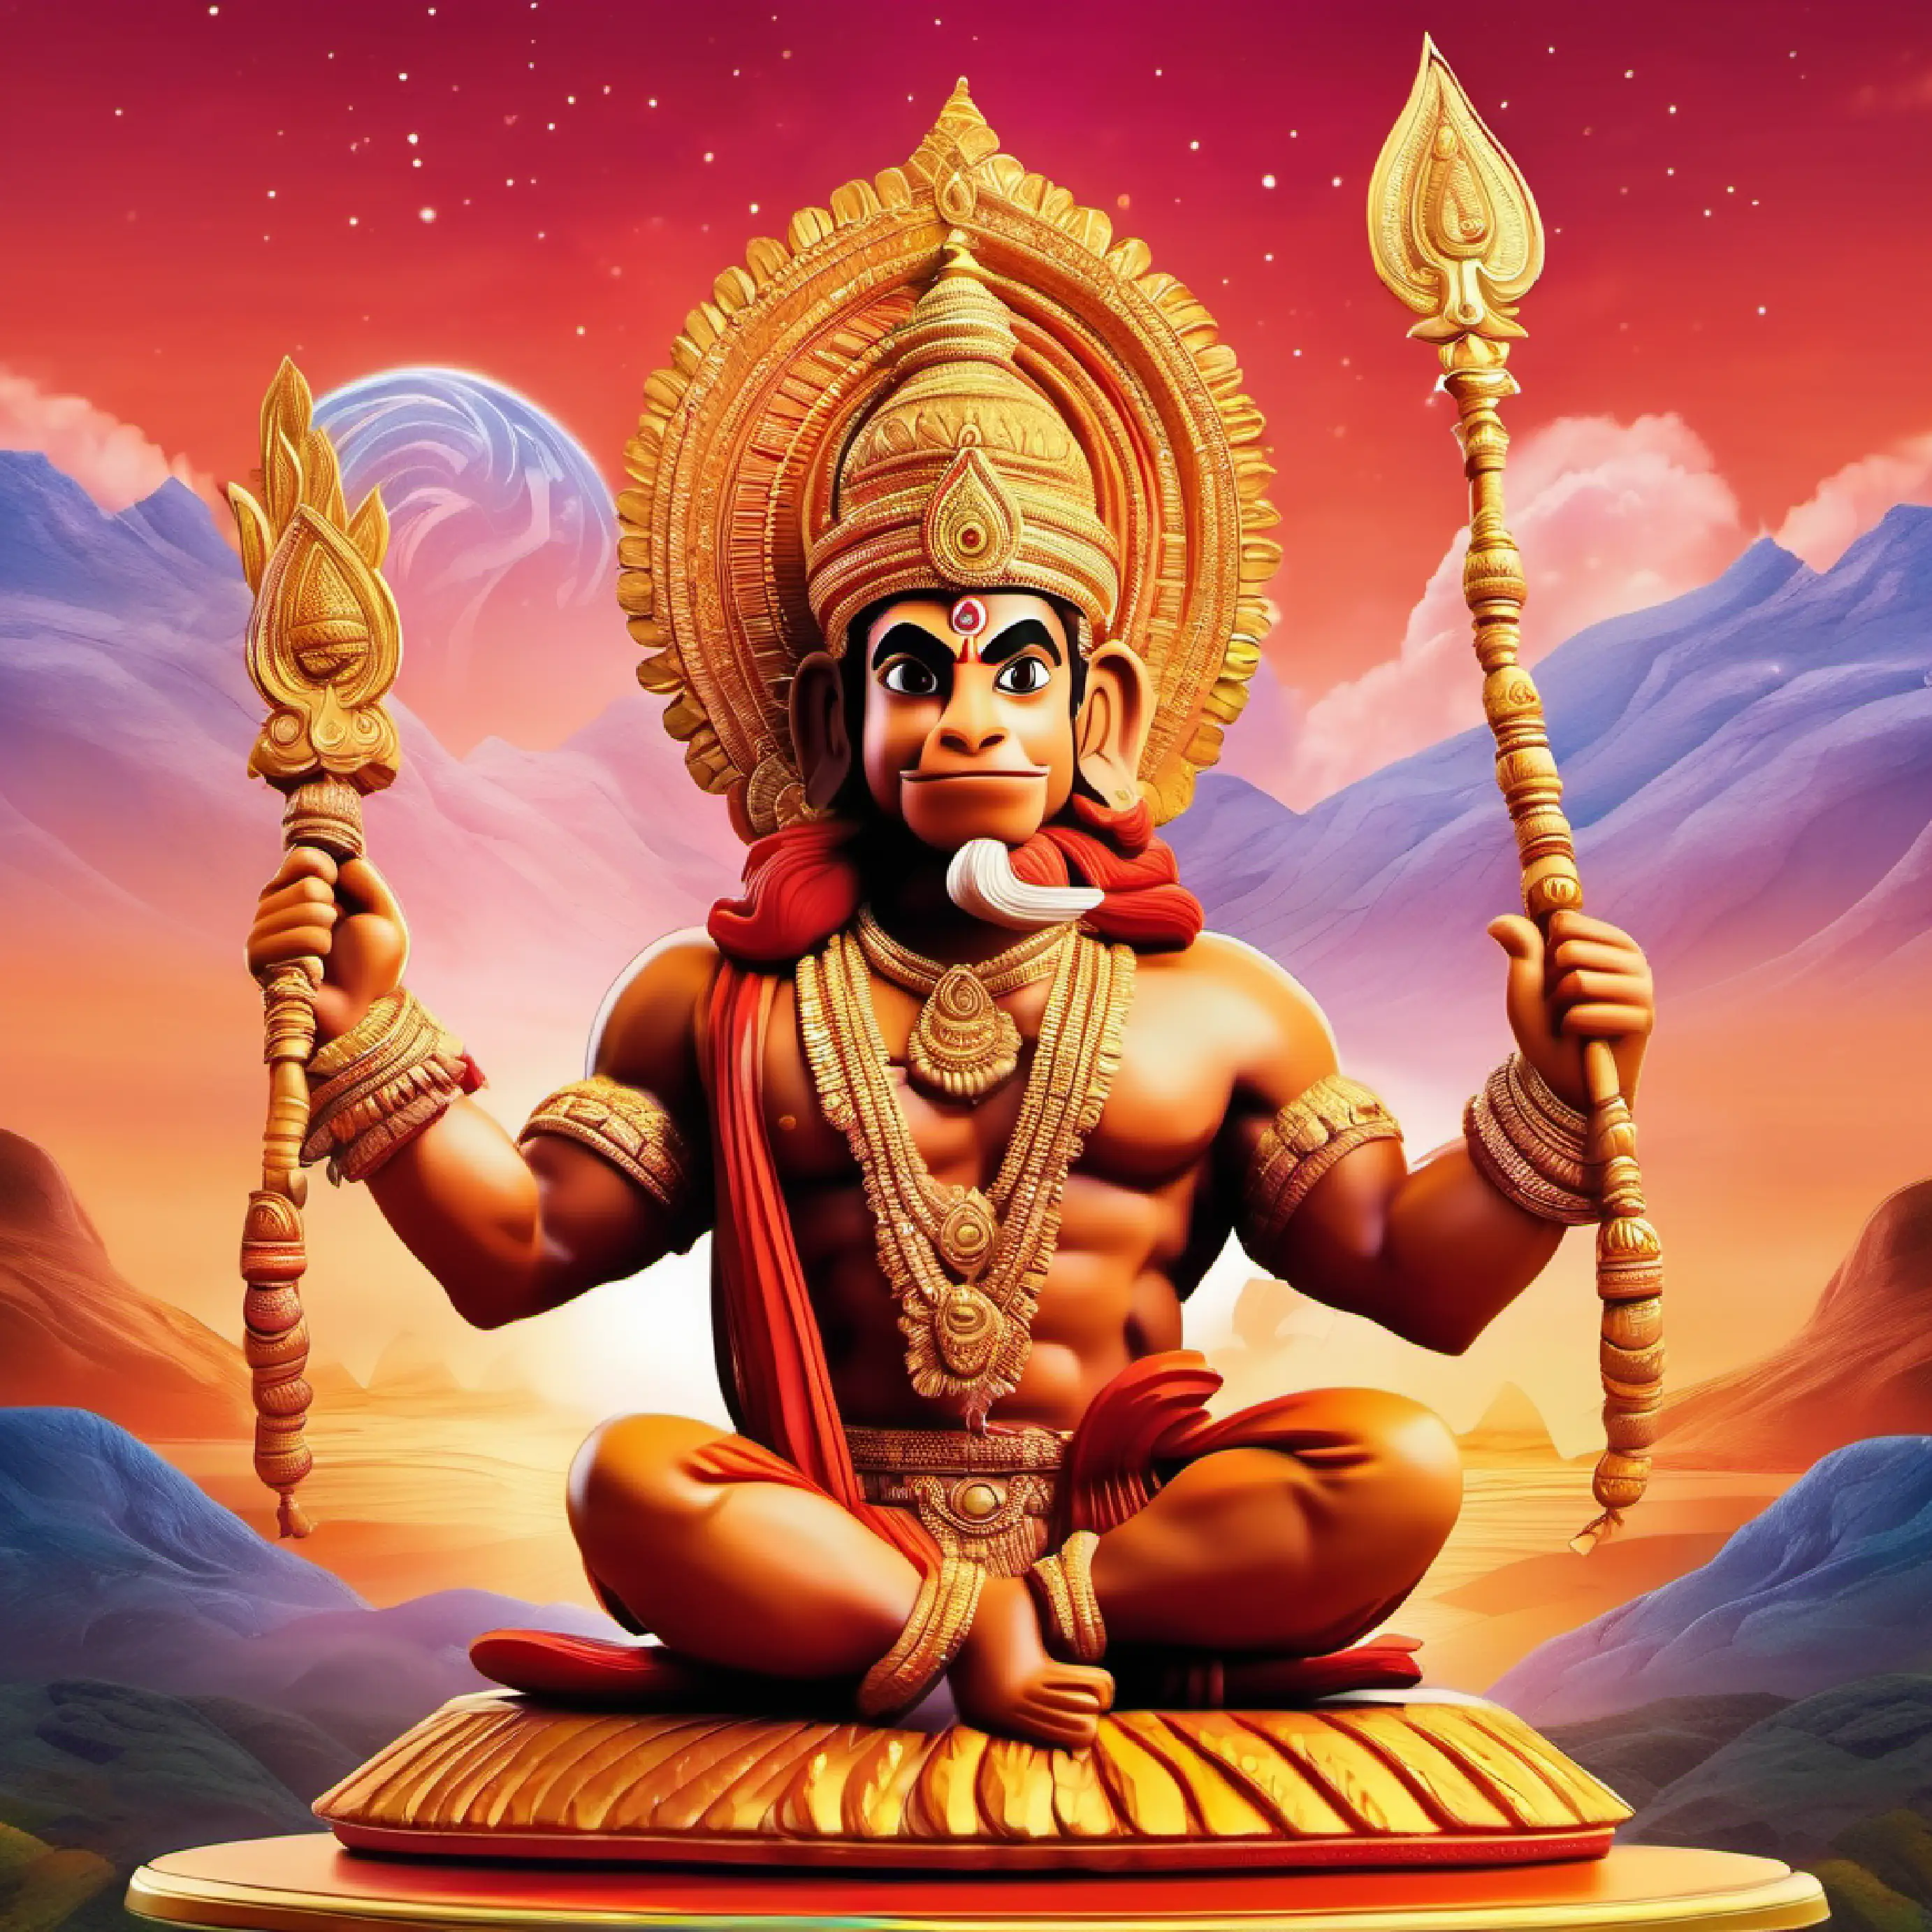 Visualize Hanuman in a majestic stance against a backdrop of a vibrant, celestial landscape. The background could include ethereal clouds, subtle hints of divine energy, and perhaps an image of Lord Rama and Sita in the heavens, signifying Hanuman's undying loyalty. Let the colors blend harmoniously, creating an atmosphere that resonates with the spiritual strength and valor embodied by Hanuman. The scene should capture the essence of his divine connection and the monumental moments from the Ramayana.